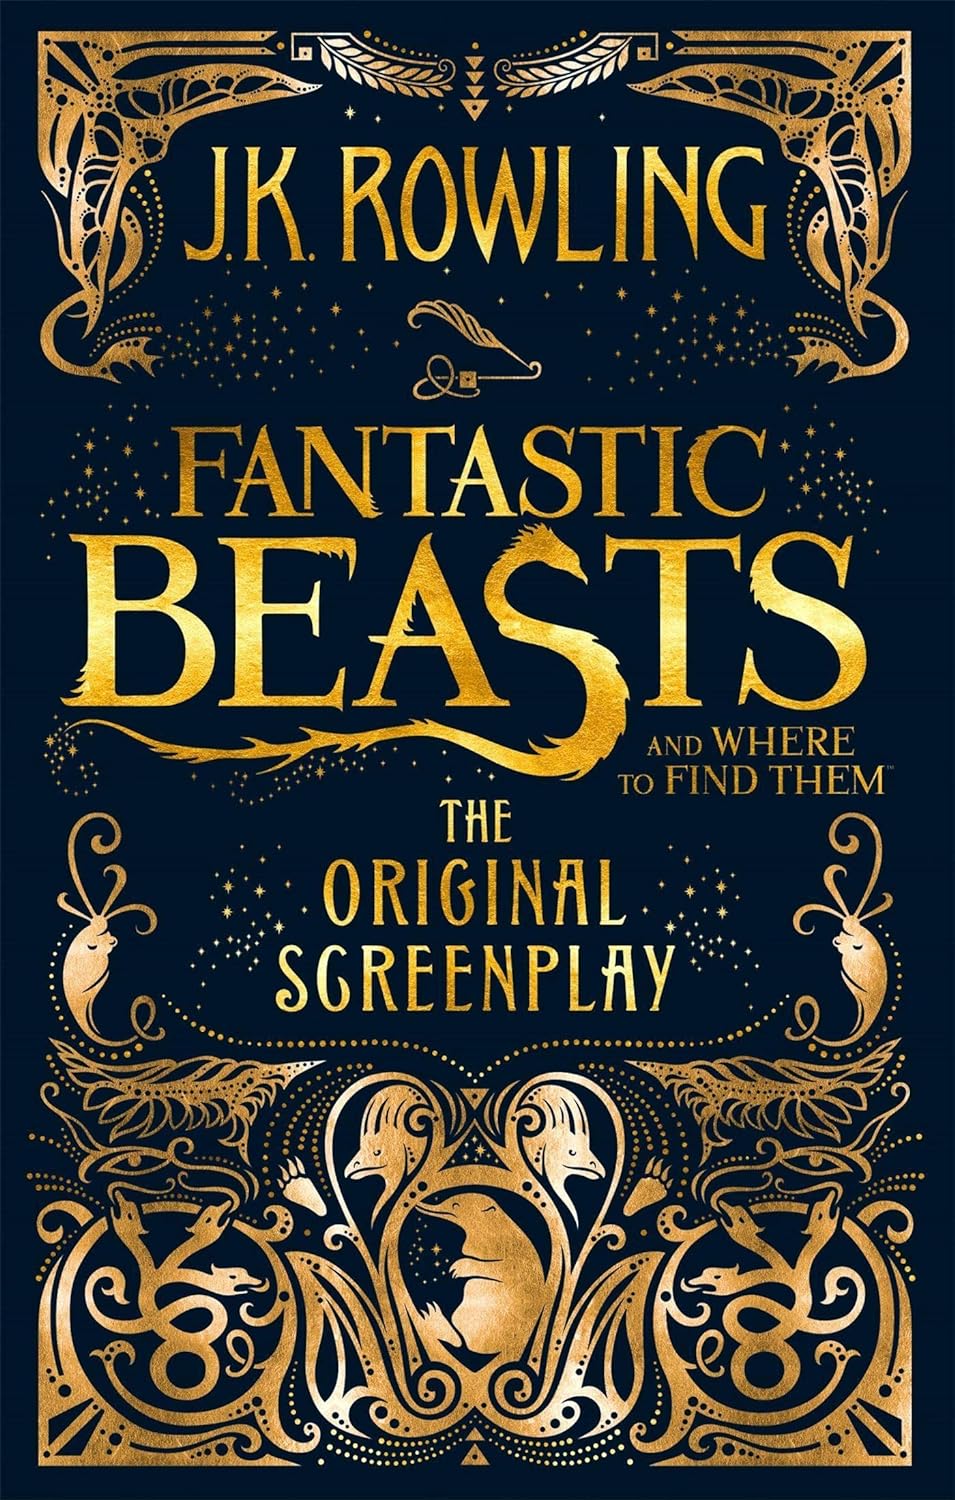 Fantastic Beasts and Where to Find Them: The Original Screenplay where architects stay in germany